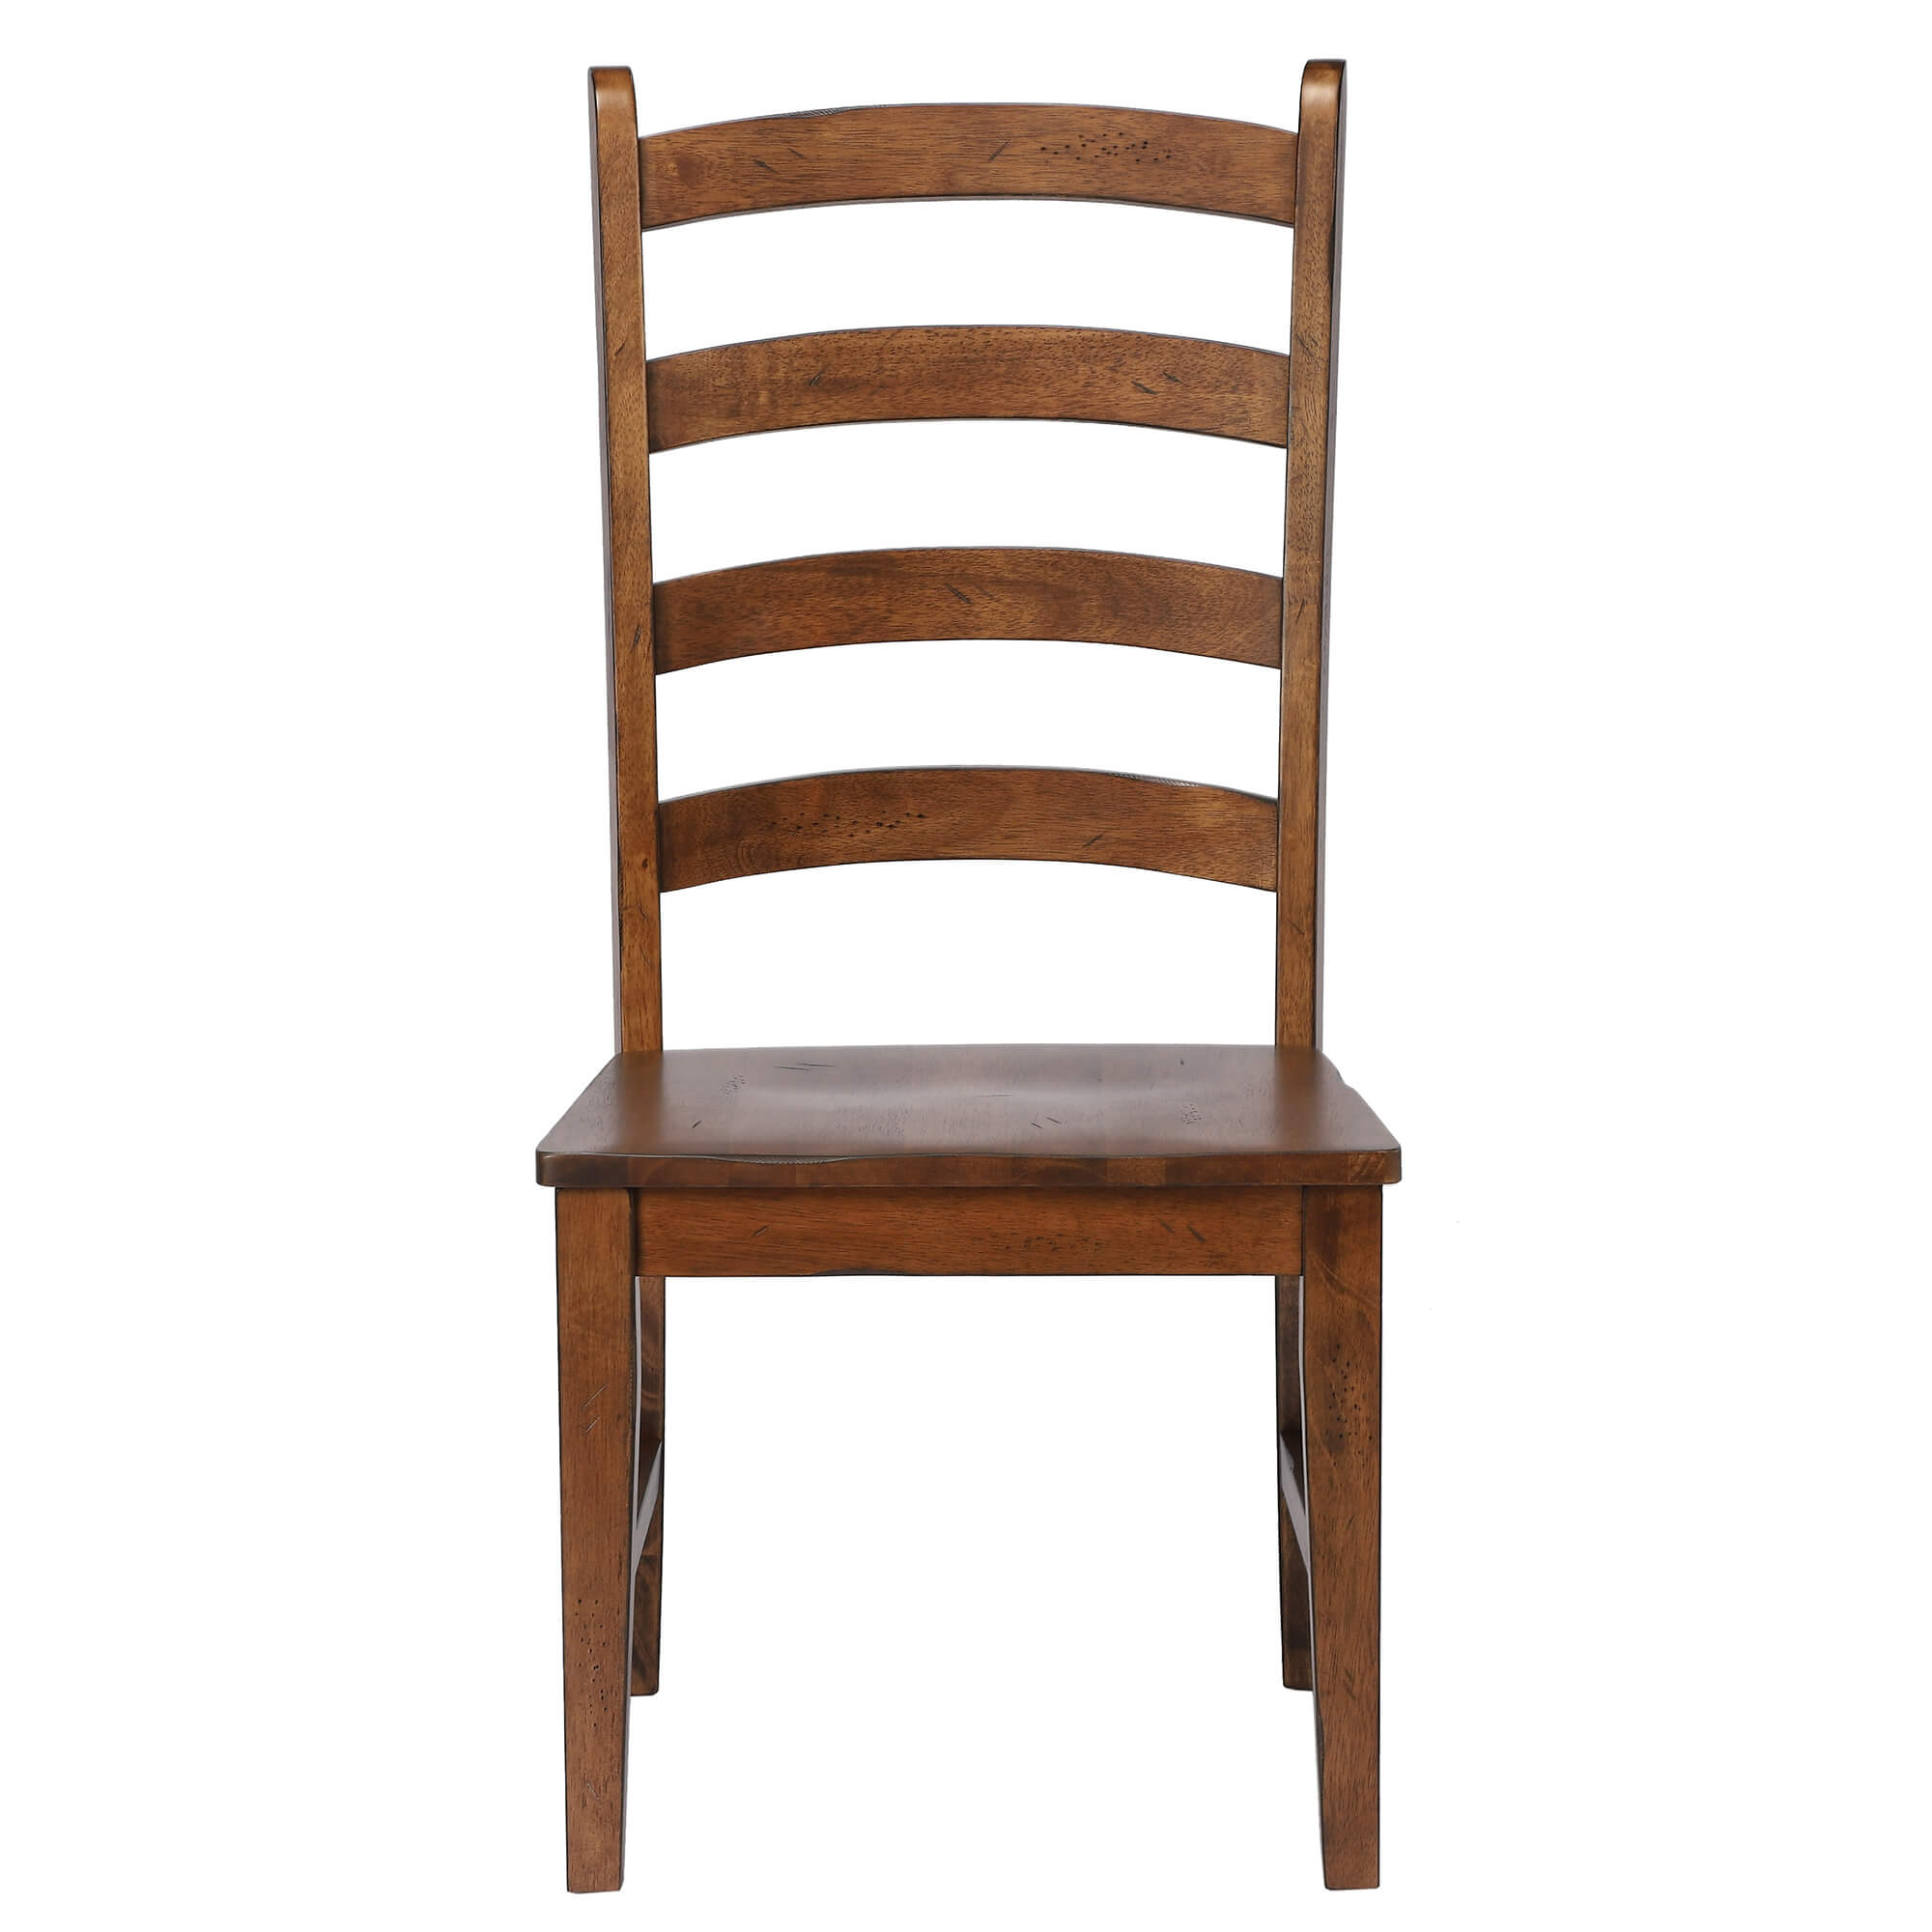 https://www.sunsettrading.com/wp-content/uploads/2021/05/Amish-Dining-Ladder-back-dining-side-chair-finished-in-chestnut-front-view-DLU-BR-C80-AM-2.jpg